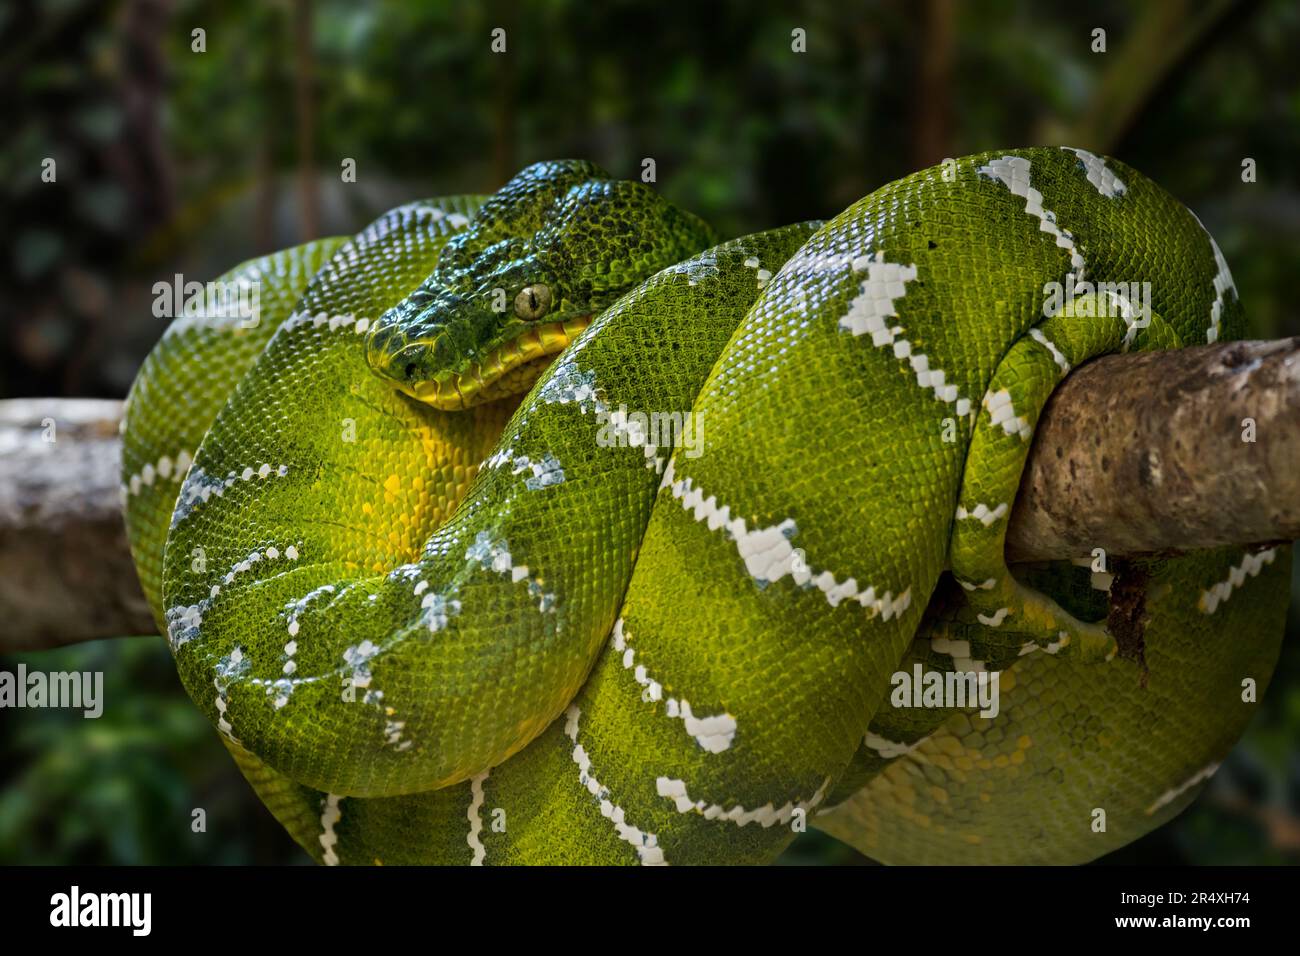 Emerald tree boa (Corallus caninus) curled up in tree, non-venomous tropical snake species native to the rainforests of South America Stock Photo